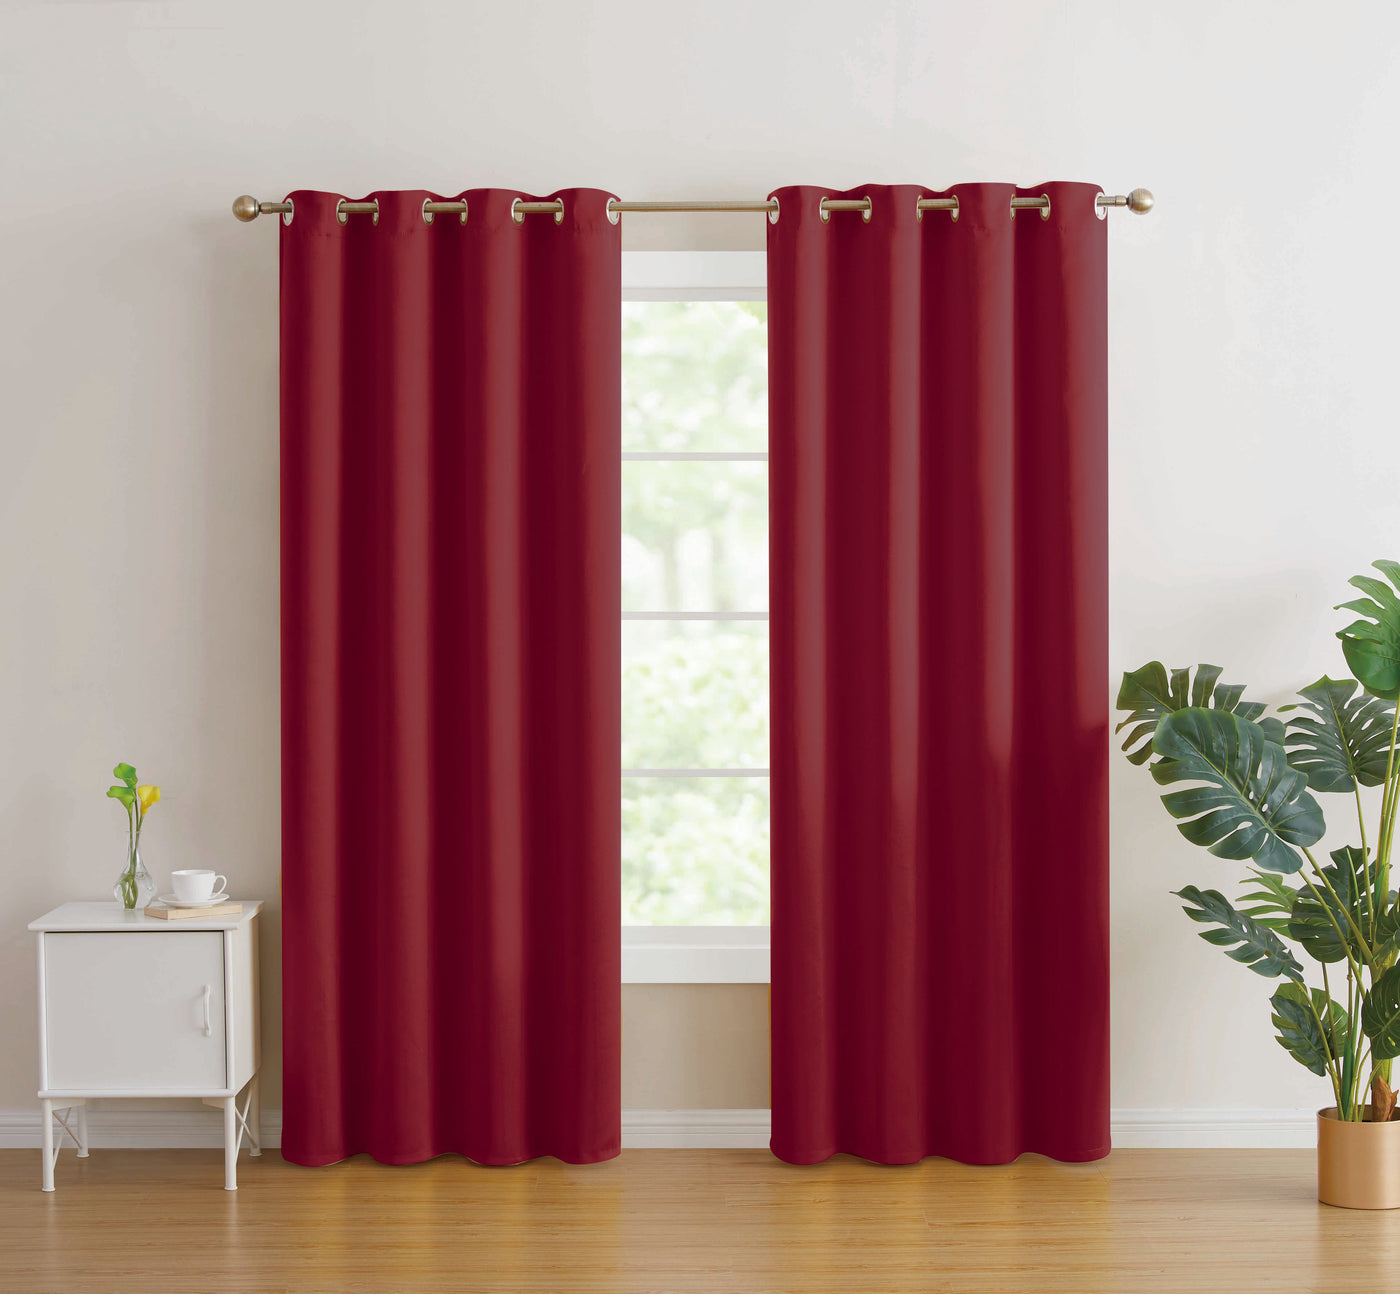 2pc Solid Grommet Thermal Insulated Window Curtain Panels Room Darkening Blackout 84"